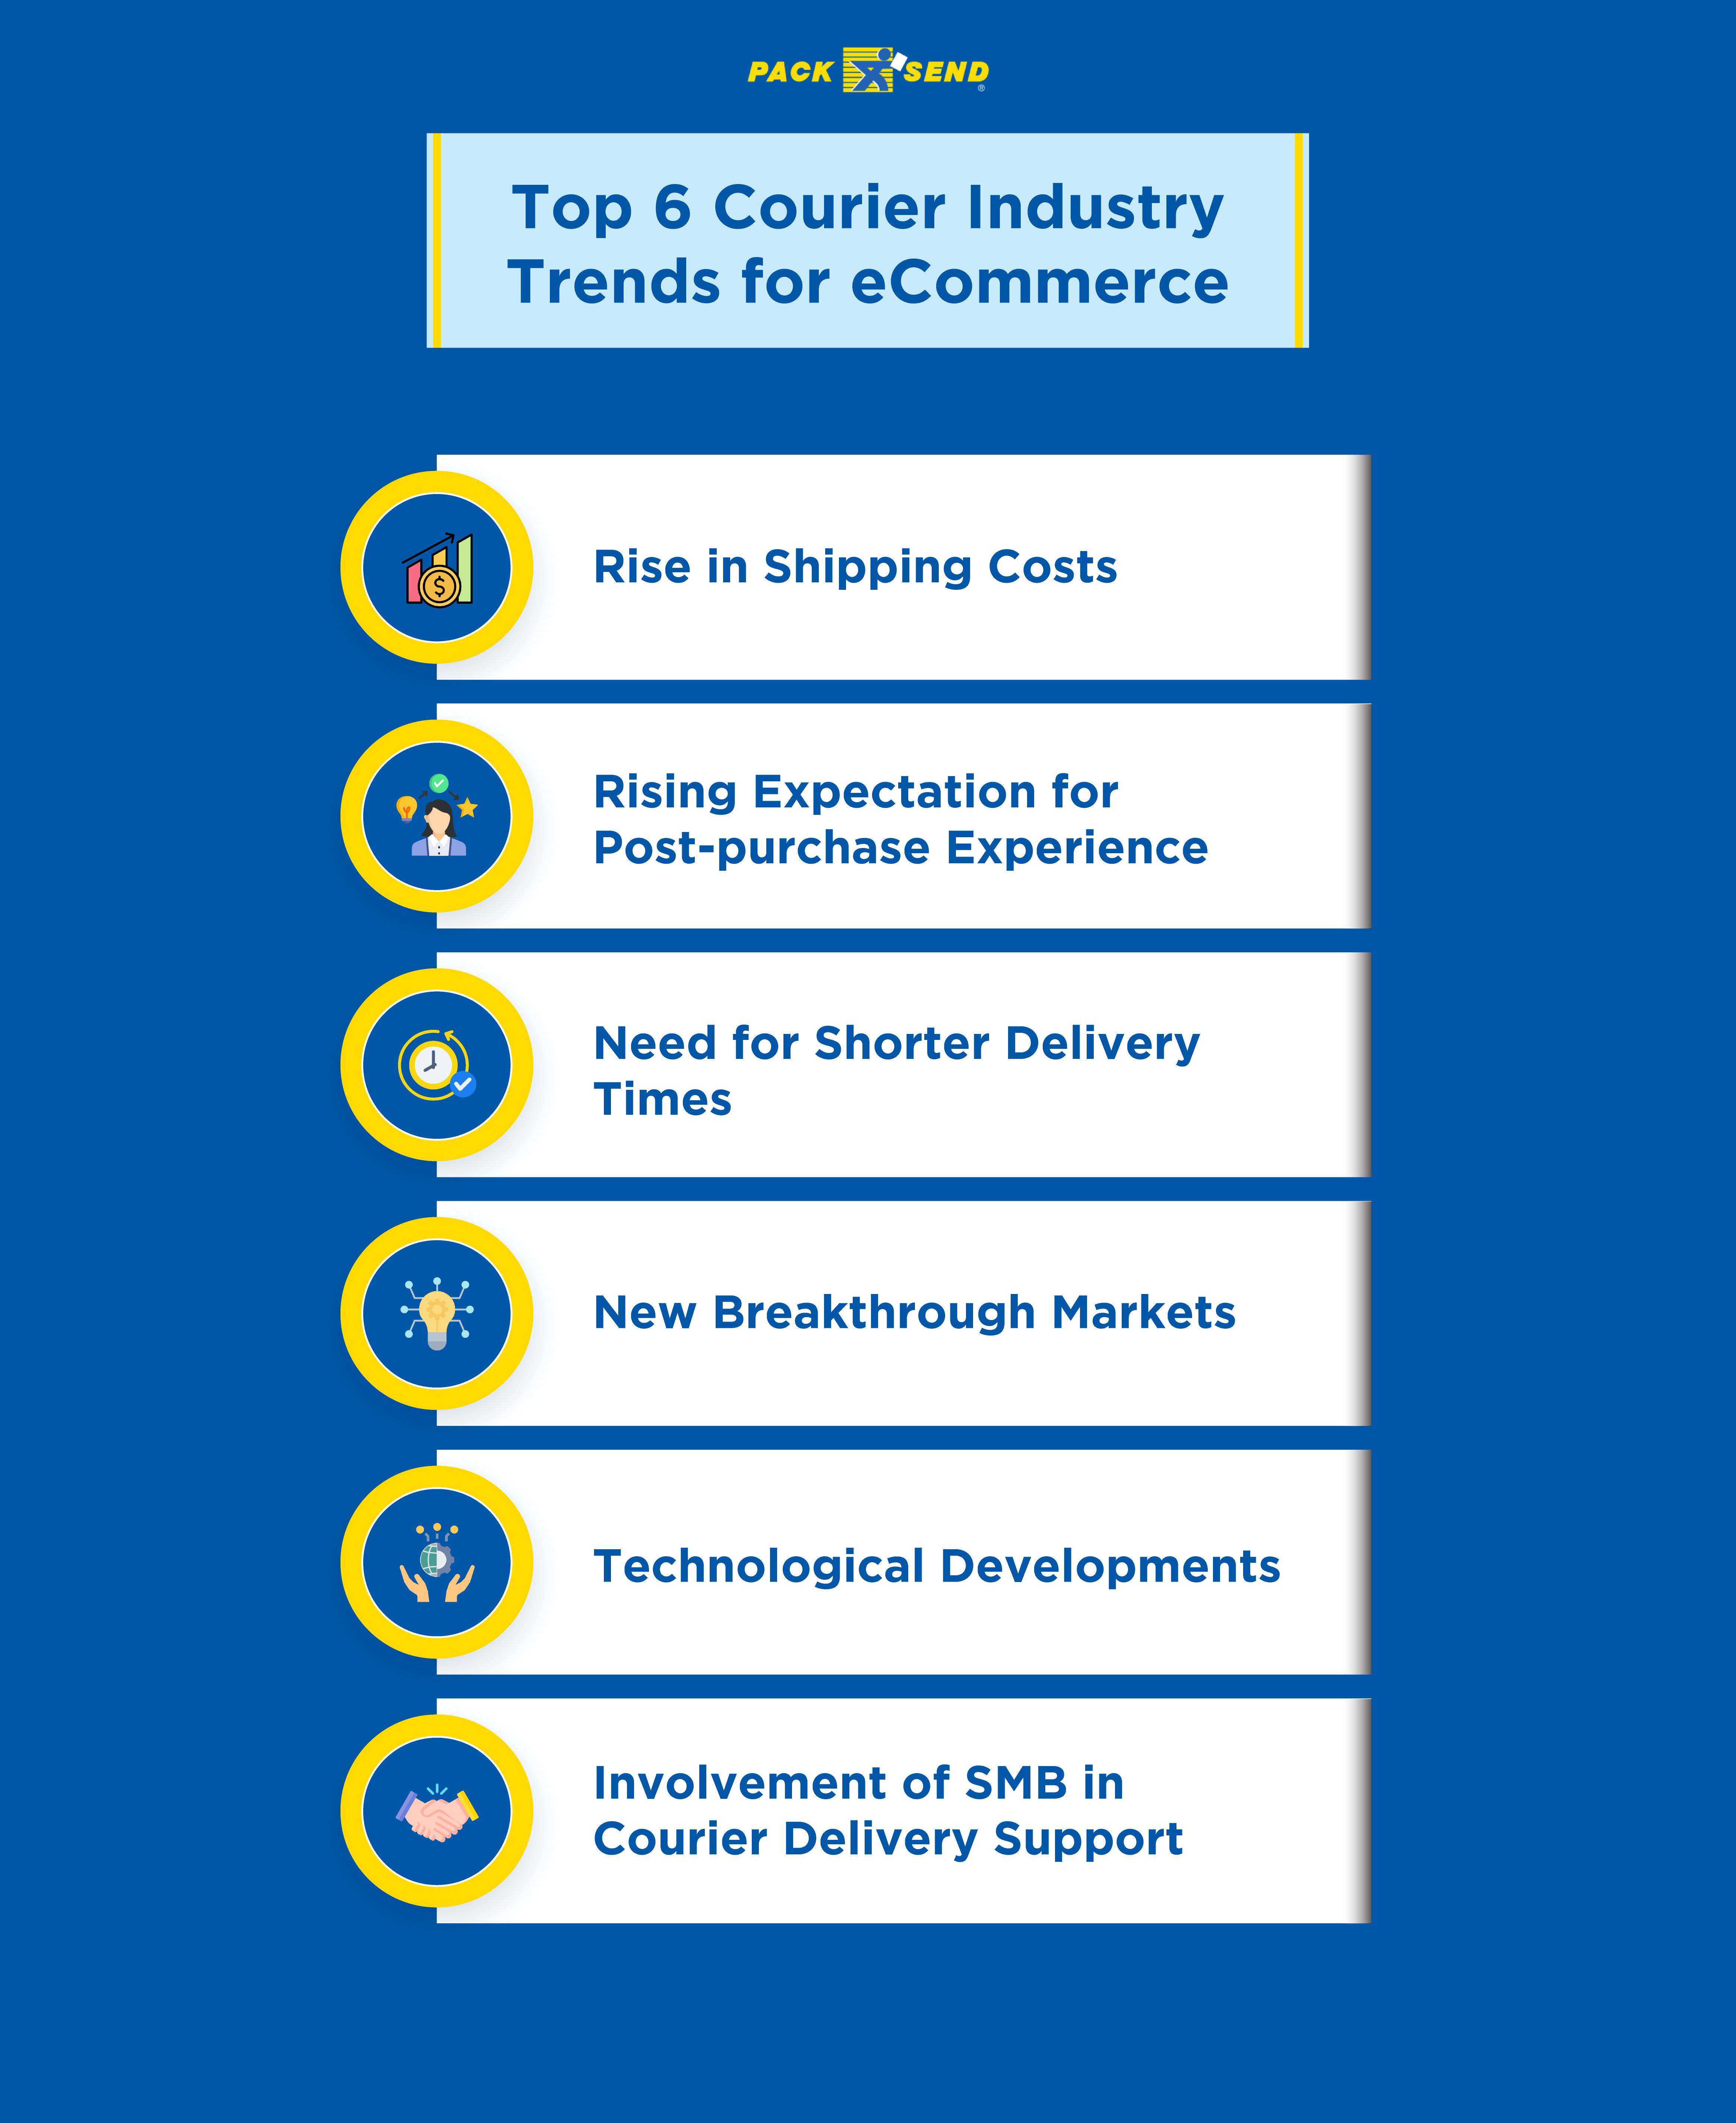 Top 6 Courier Industry Trends for eCommerce